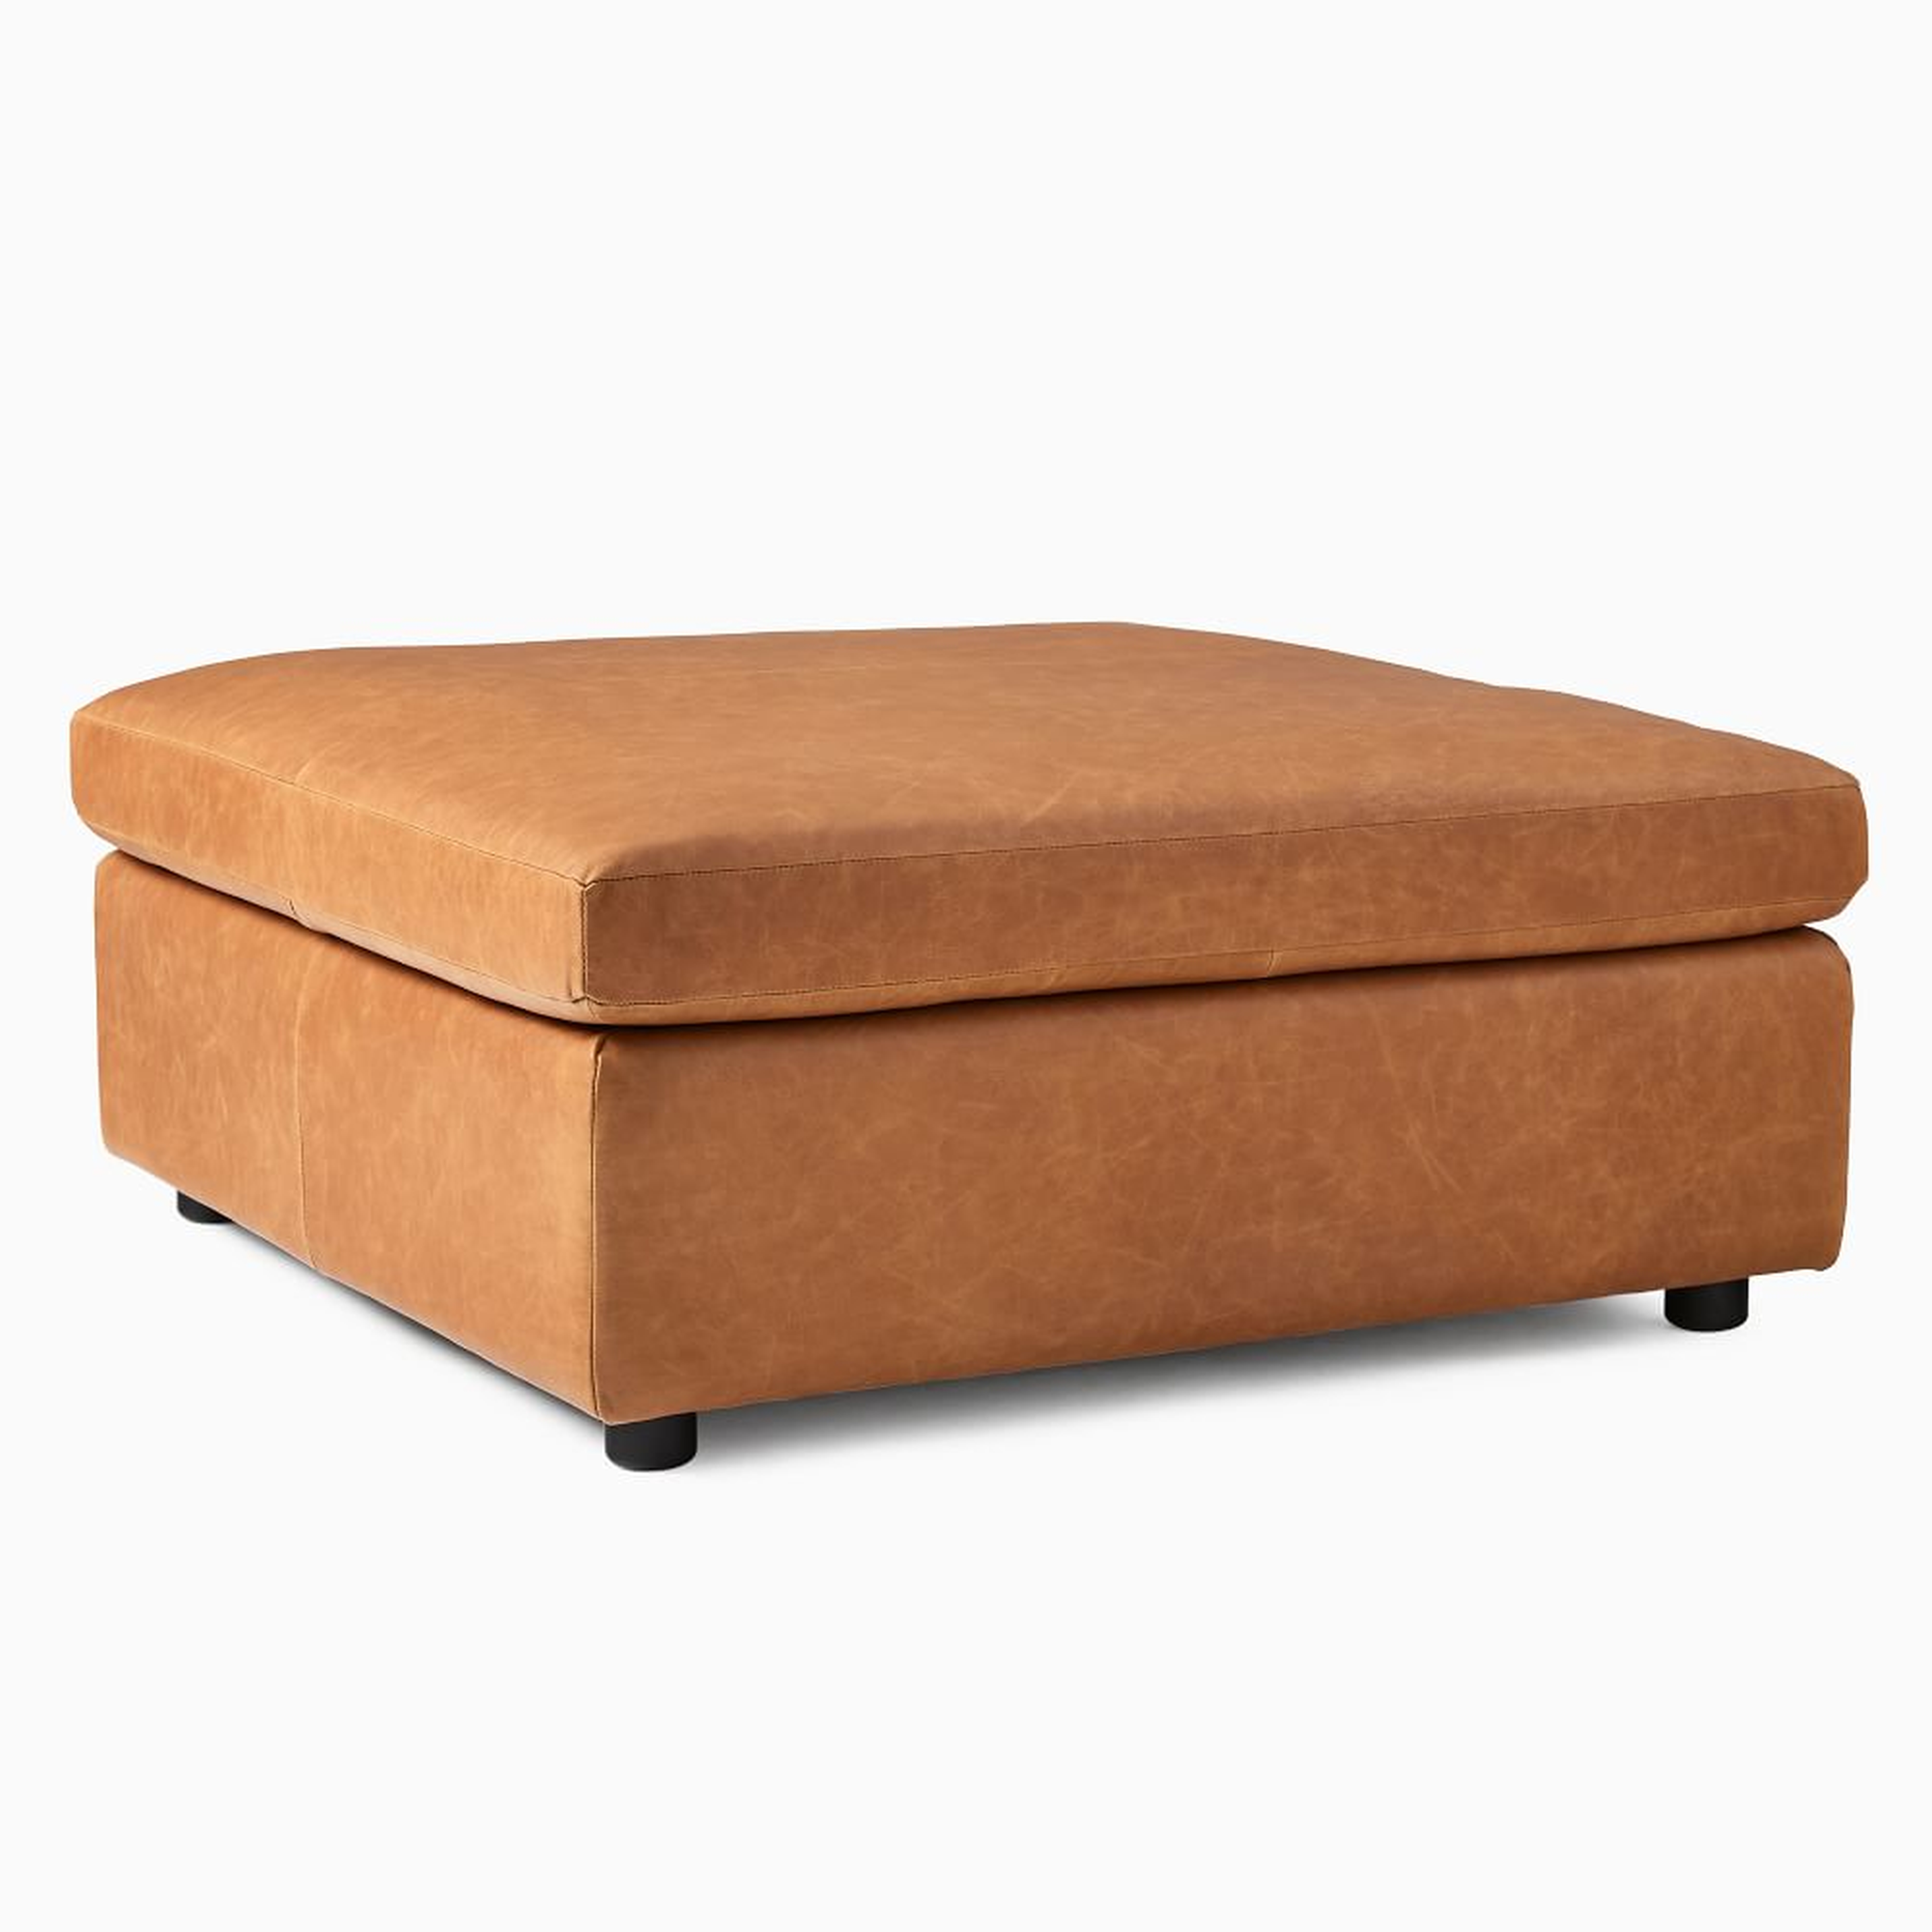 Marin Large Square Ottoman, Down, Vegan Leather, Saddle, Concealed Support - West Elm